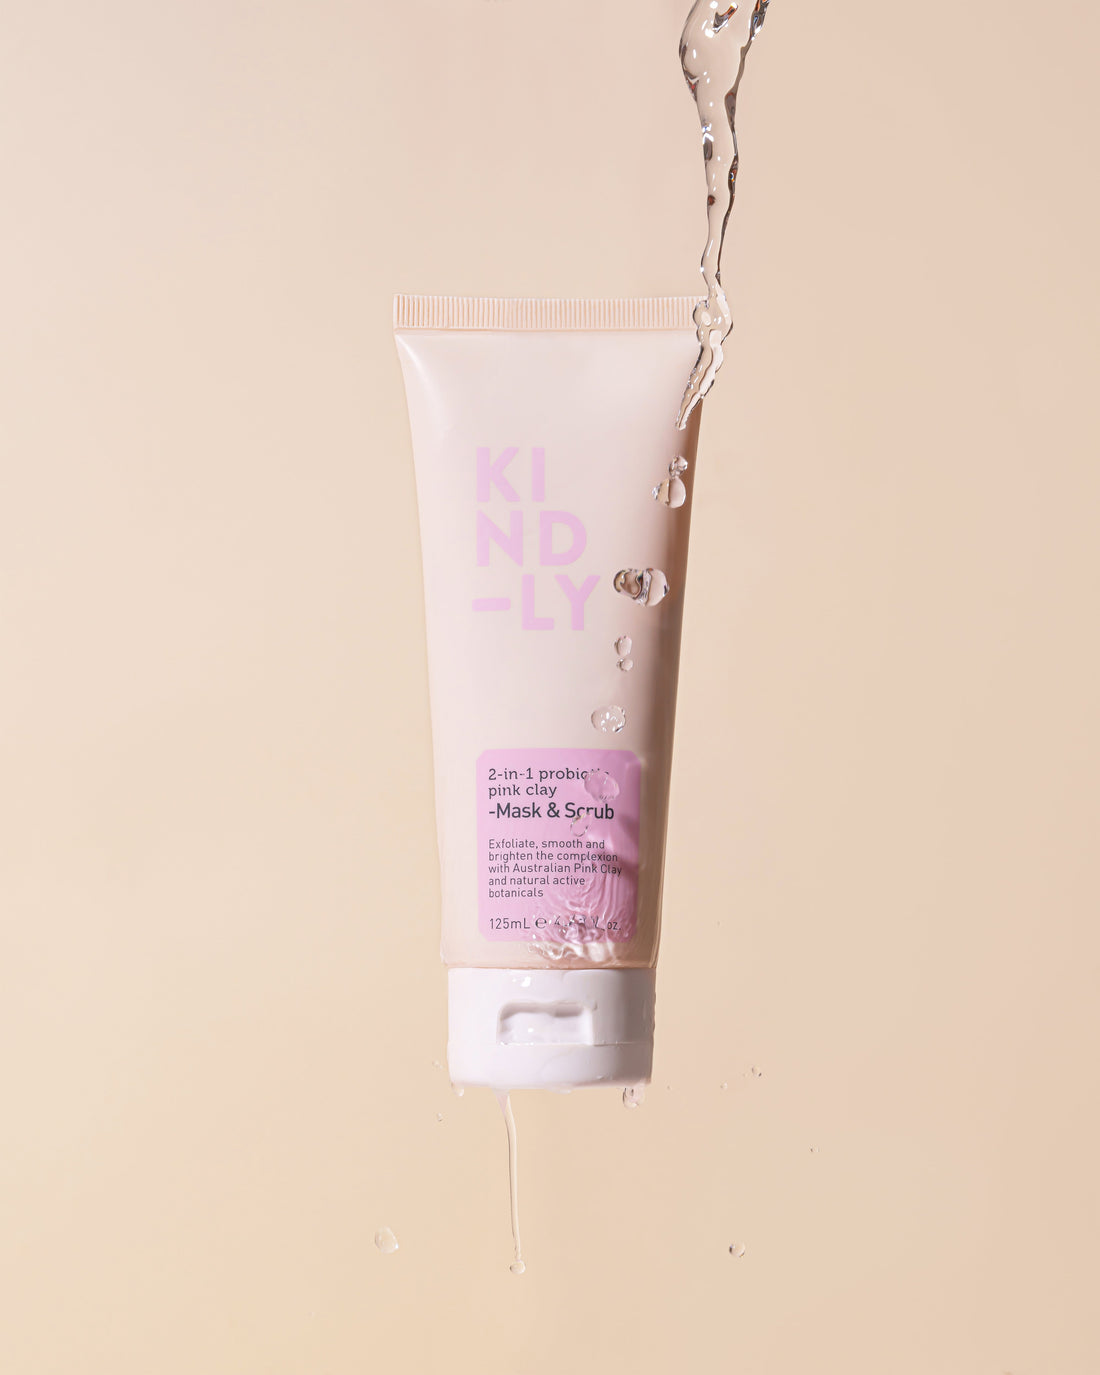 Free 2-in-1 Probiotic Pink Clay Mask & Scrub